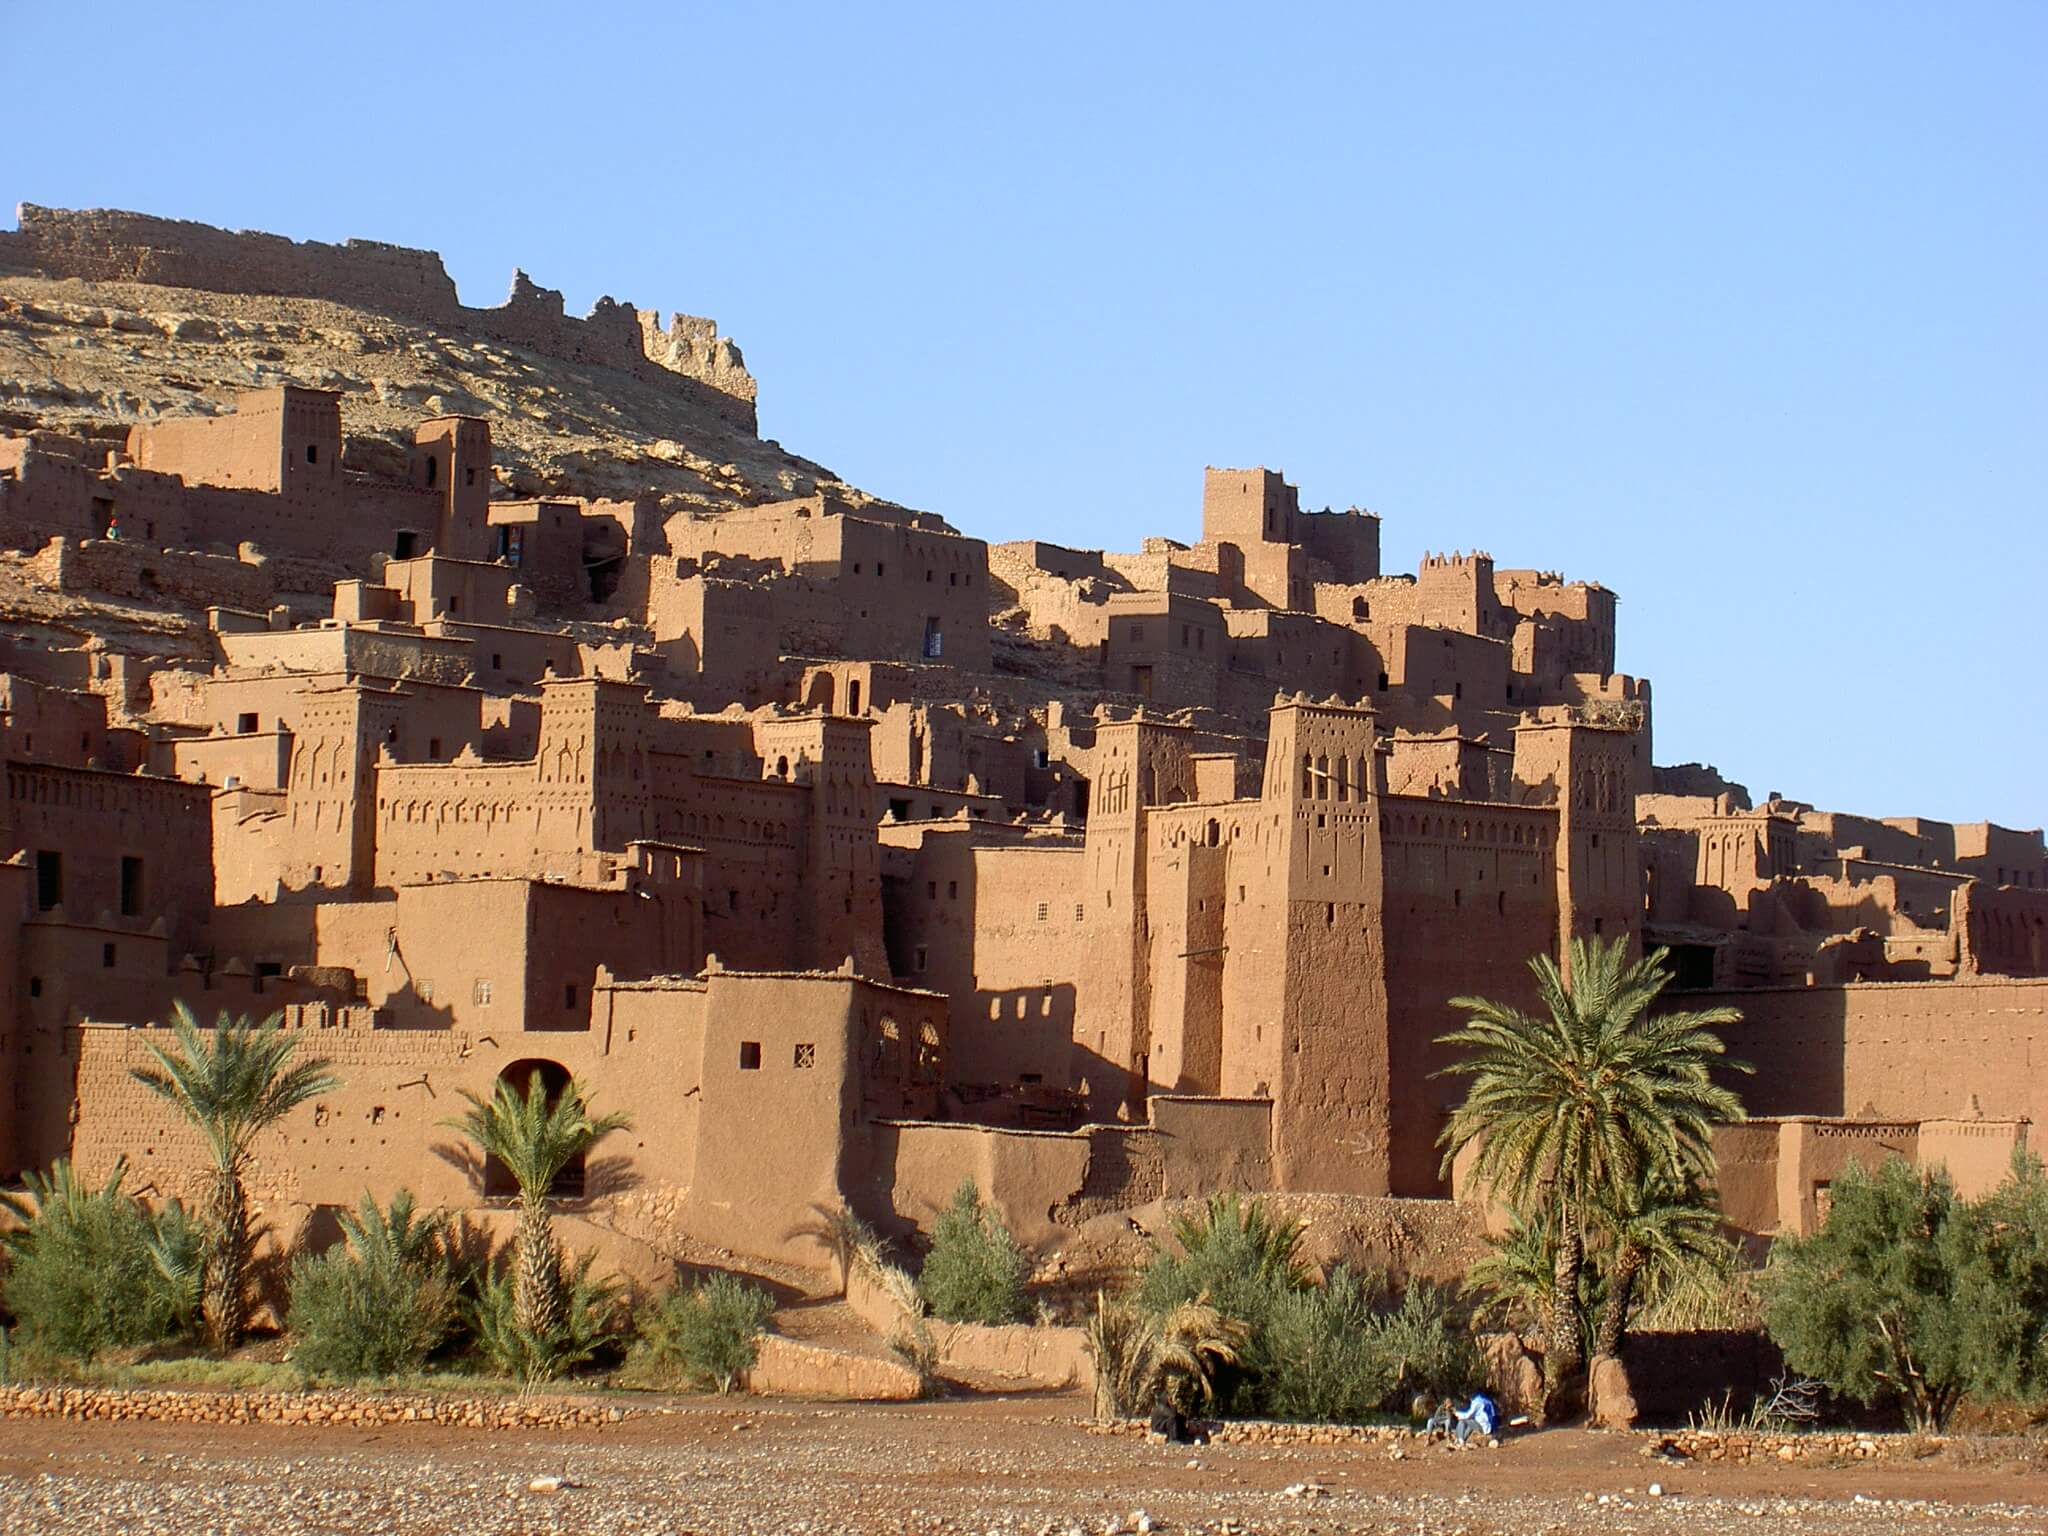 Marrakech Excurions, Budget ait ben haddou & Ouarzazate excursion from marrakech in group